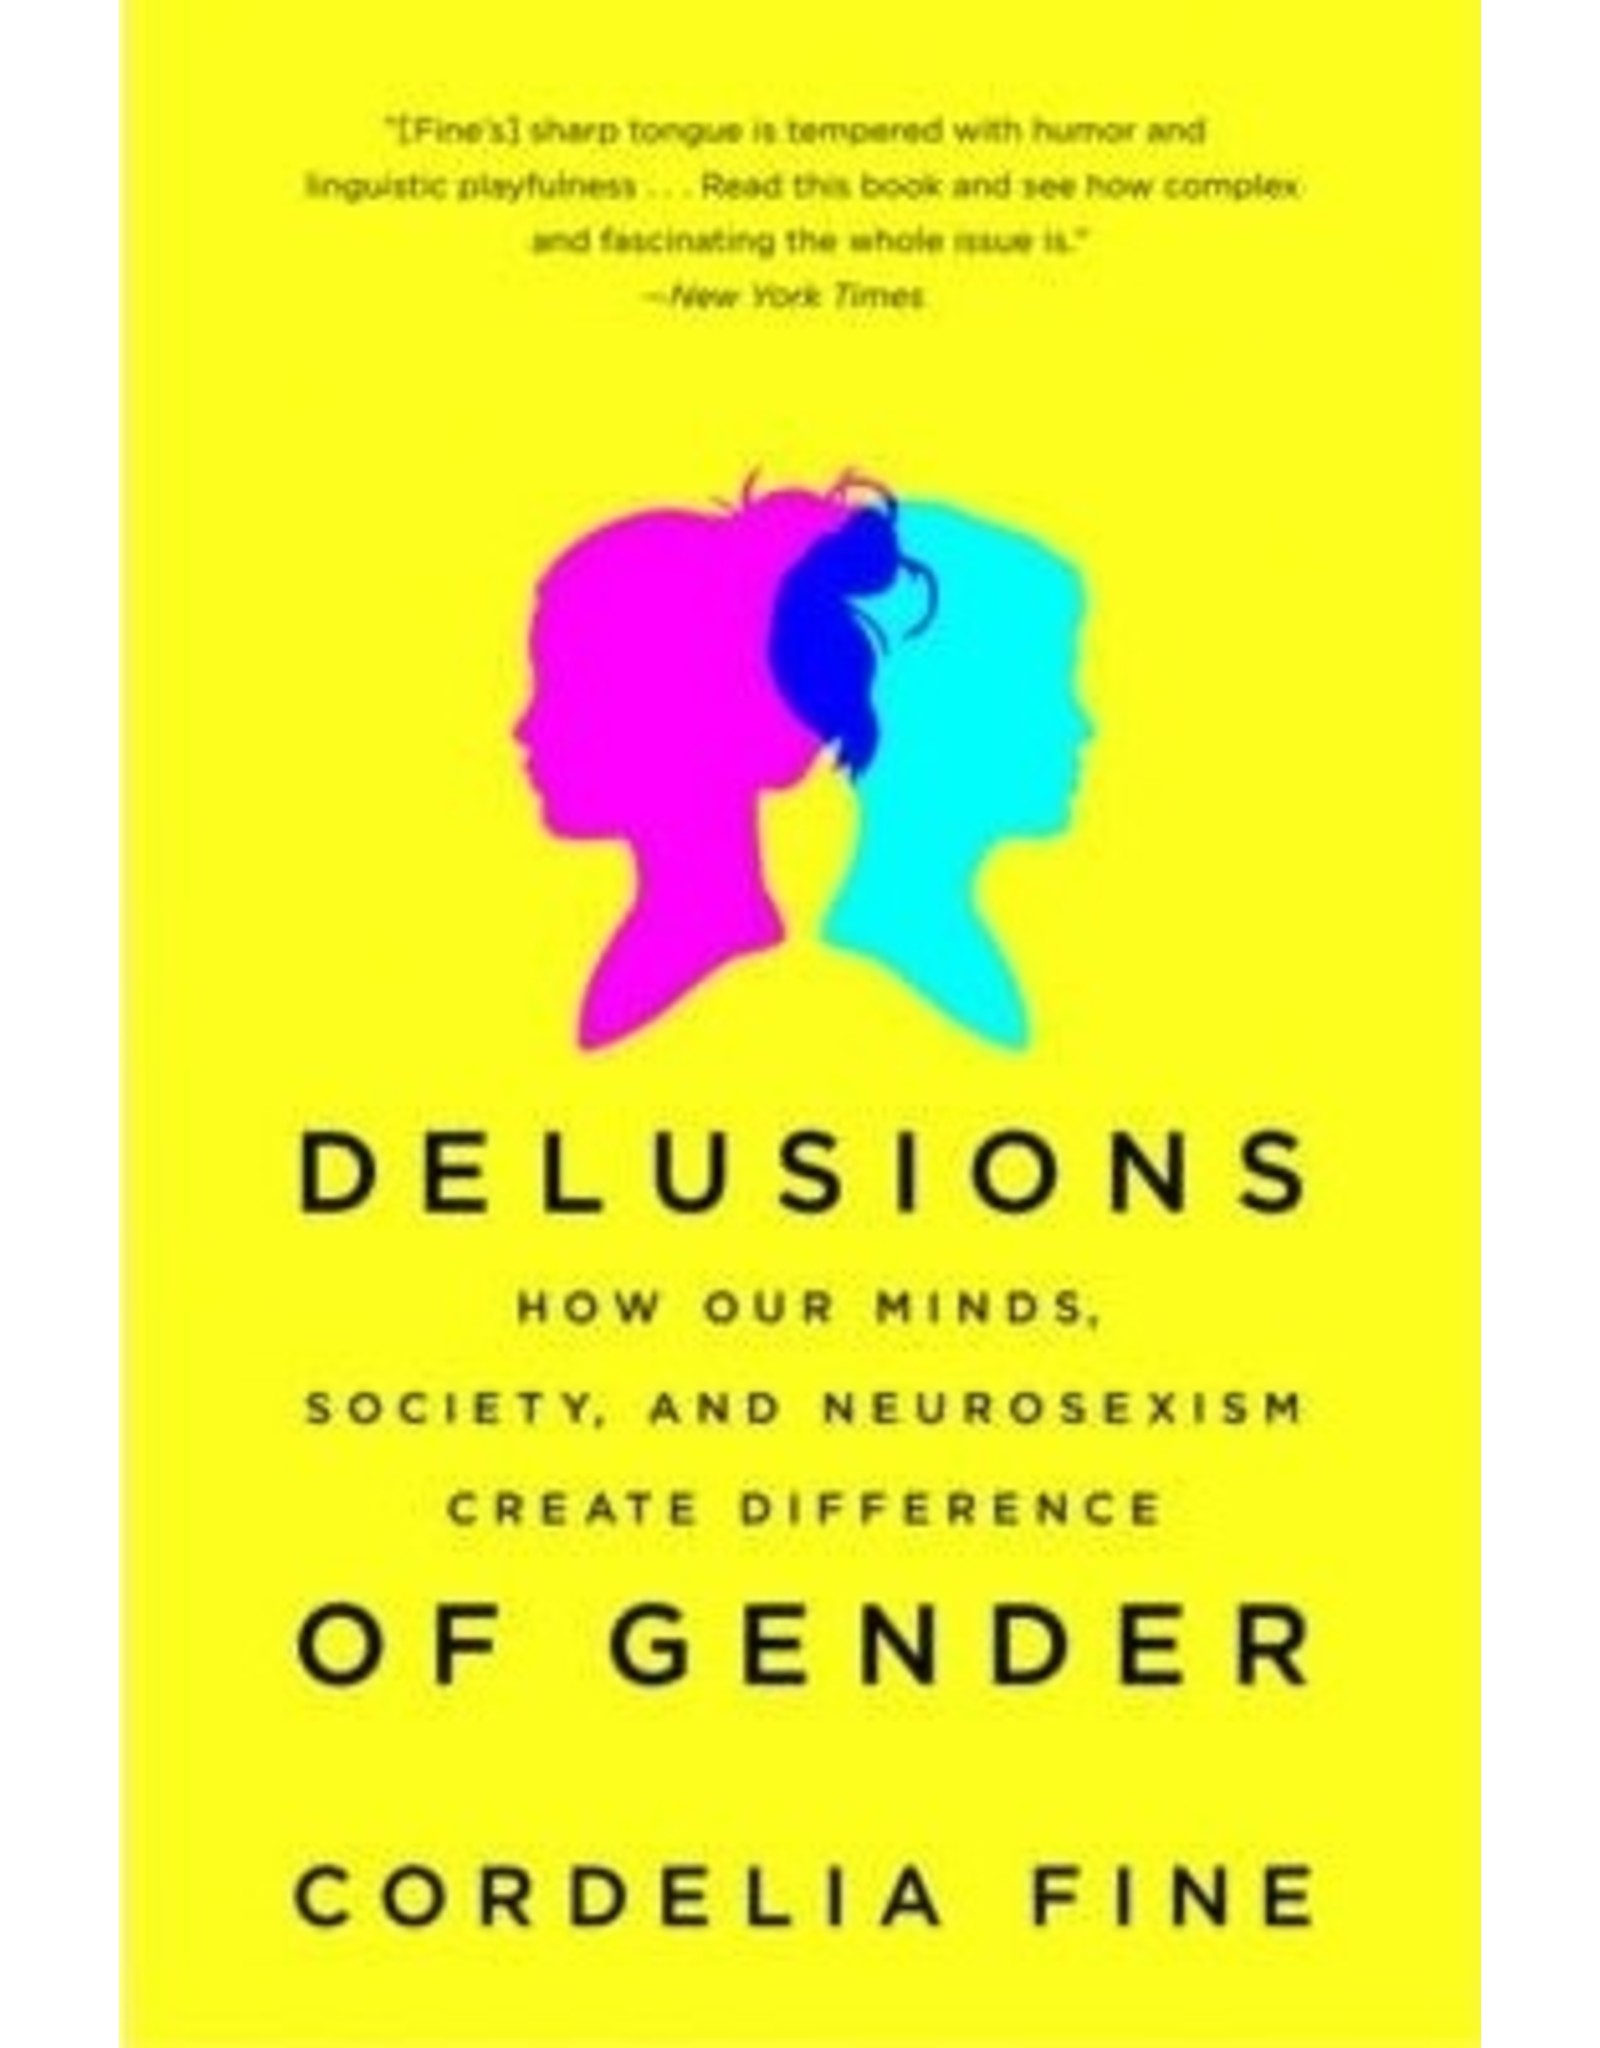 Literature Delusions of Gender: How Our Minds, Society, and Neurosexism Create Difference